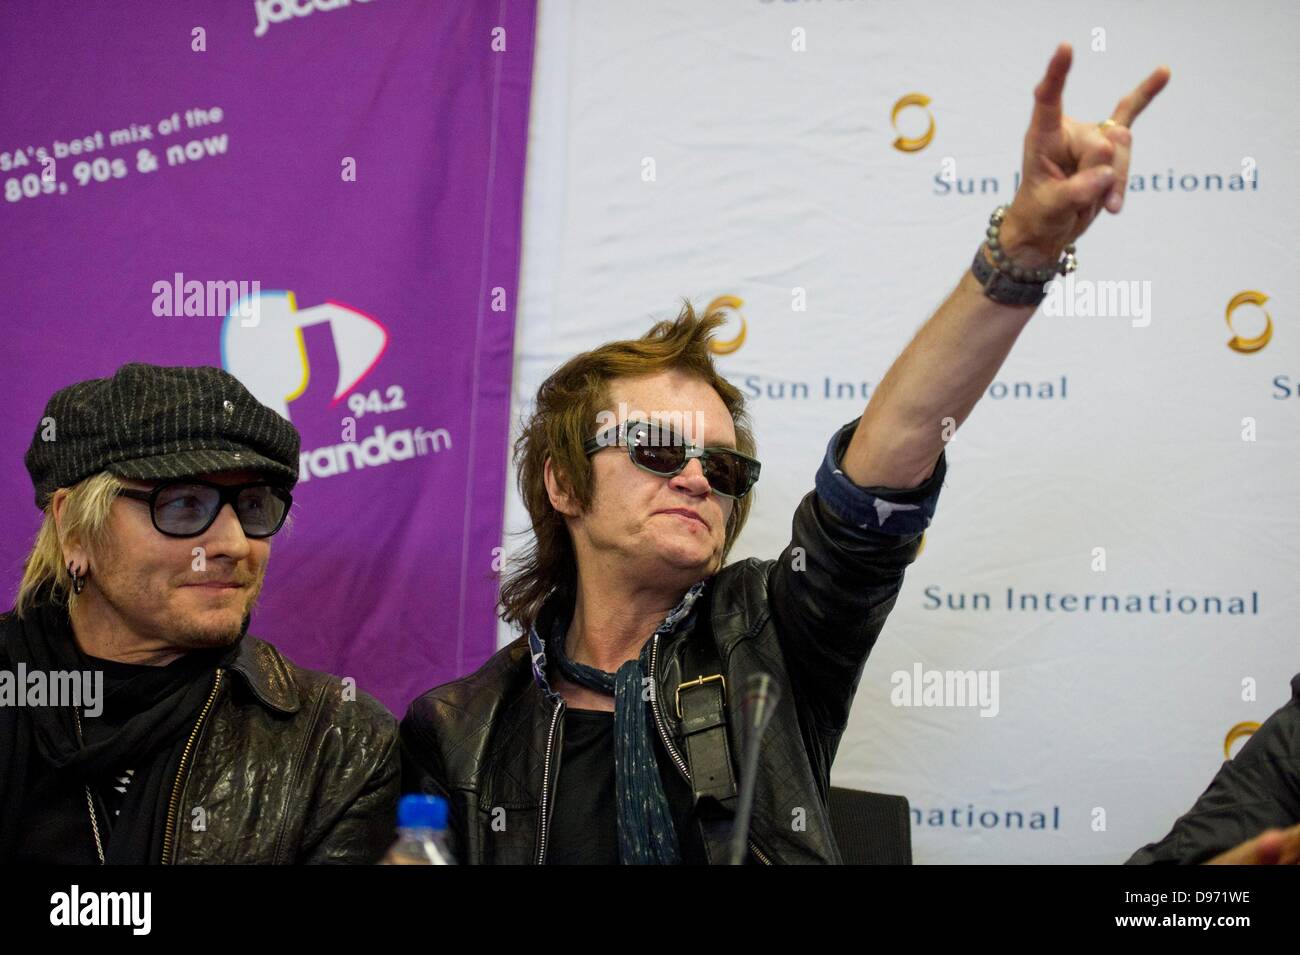 Johannesburg, South Africa. June 12, 2013.  Matt Sorum and Glen Hughes at the Jacaranda FM studios on June 12, 2013, in Johannesburg, South Africa. Kings of Chaos performed in Cape Town on June 8, 2013 and are set to perform in Johannesburg on June 15 and 16, 2013. Credit:  Gallo images/Alamy Live News Stock Photo